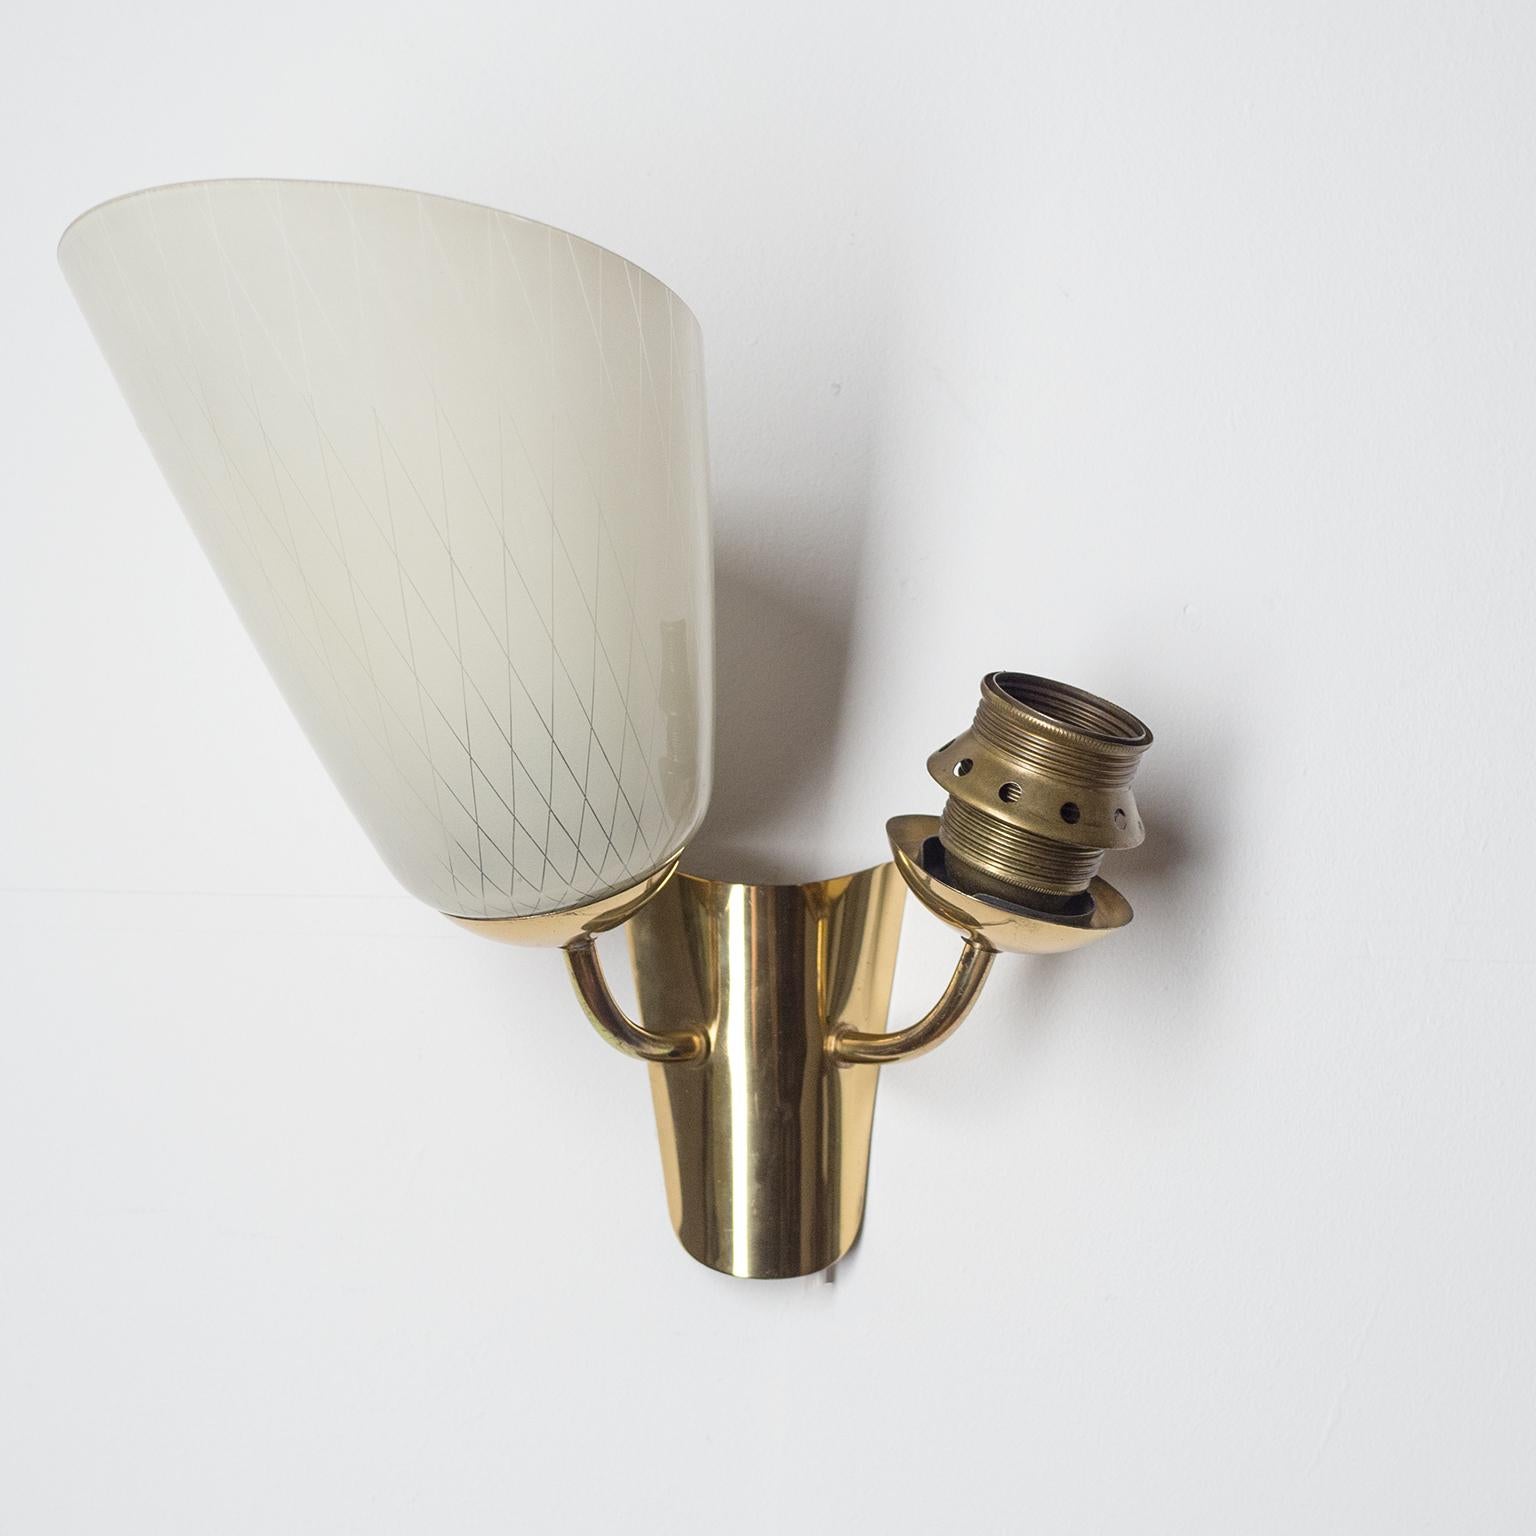 Two-Arm Wall Lamp, 1940s, Enameled Glass and Brass 1